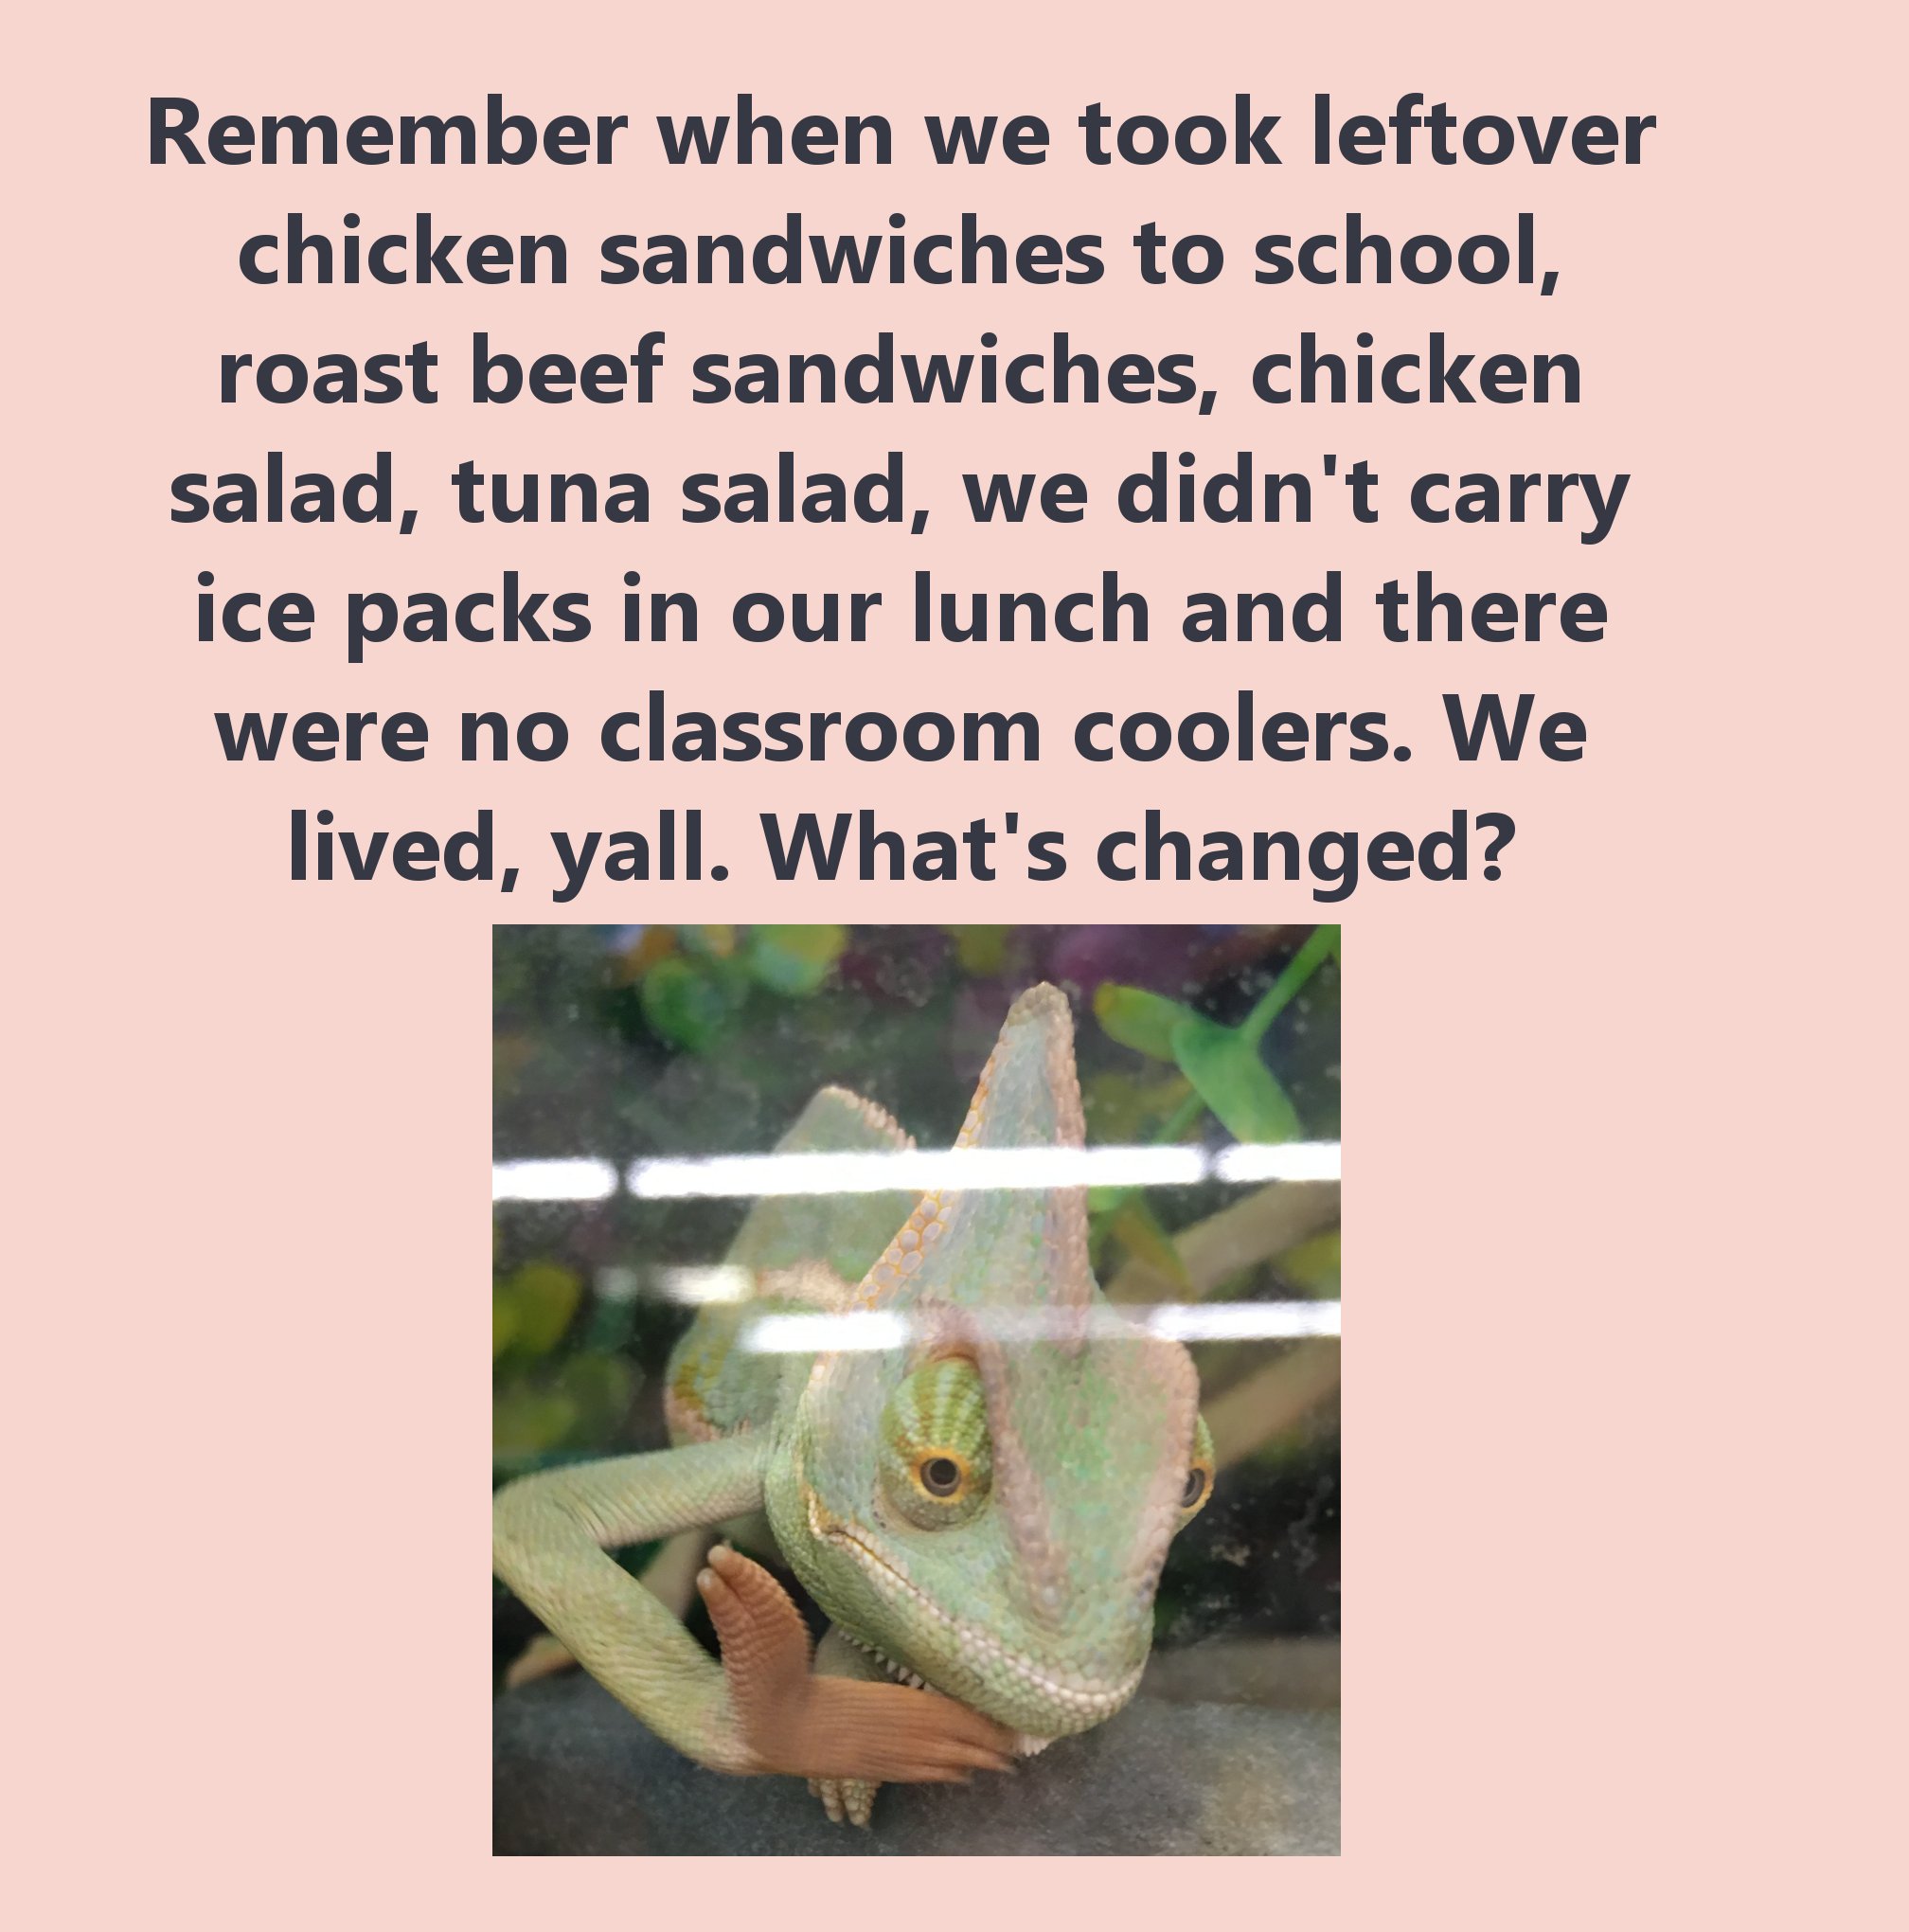 tidy up - Remember when we took leftover chicken sandwiches to school, roast beef sandwiches, chicken salad, tuna salad, we didn't carry ice packs in our lunch and there were no classroom coolers. We lived, yall. What's changed?